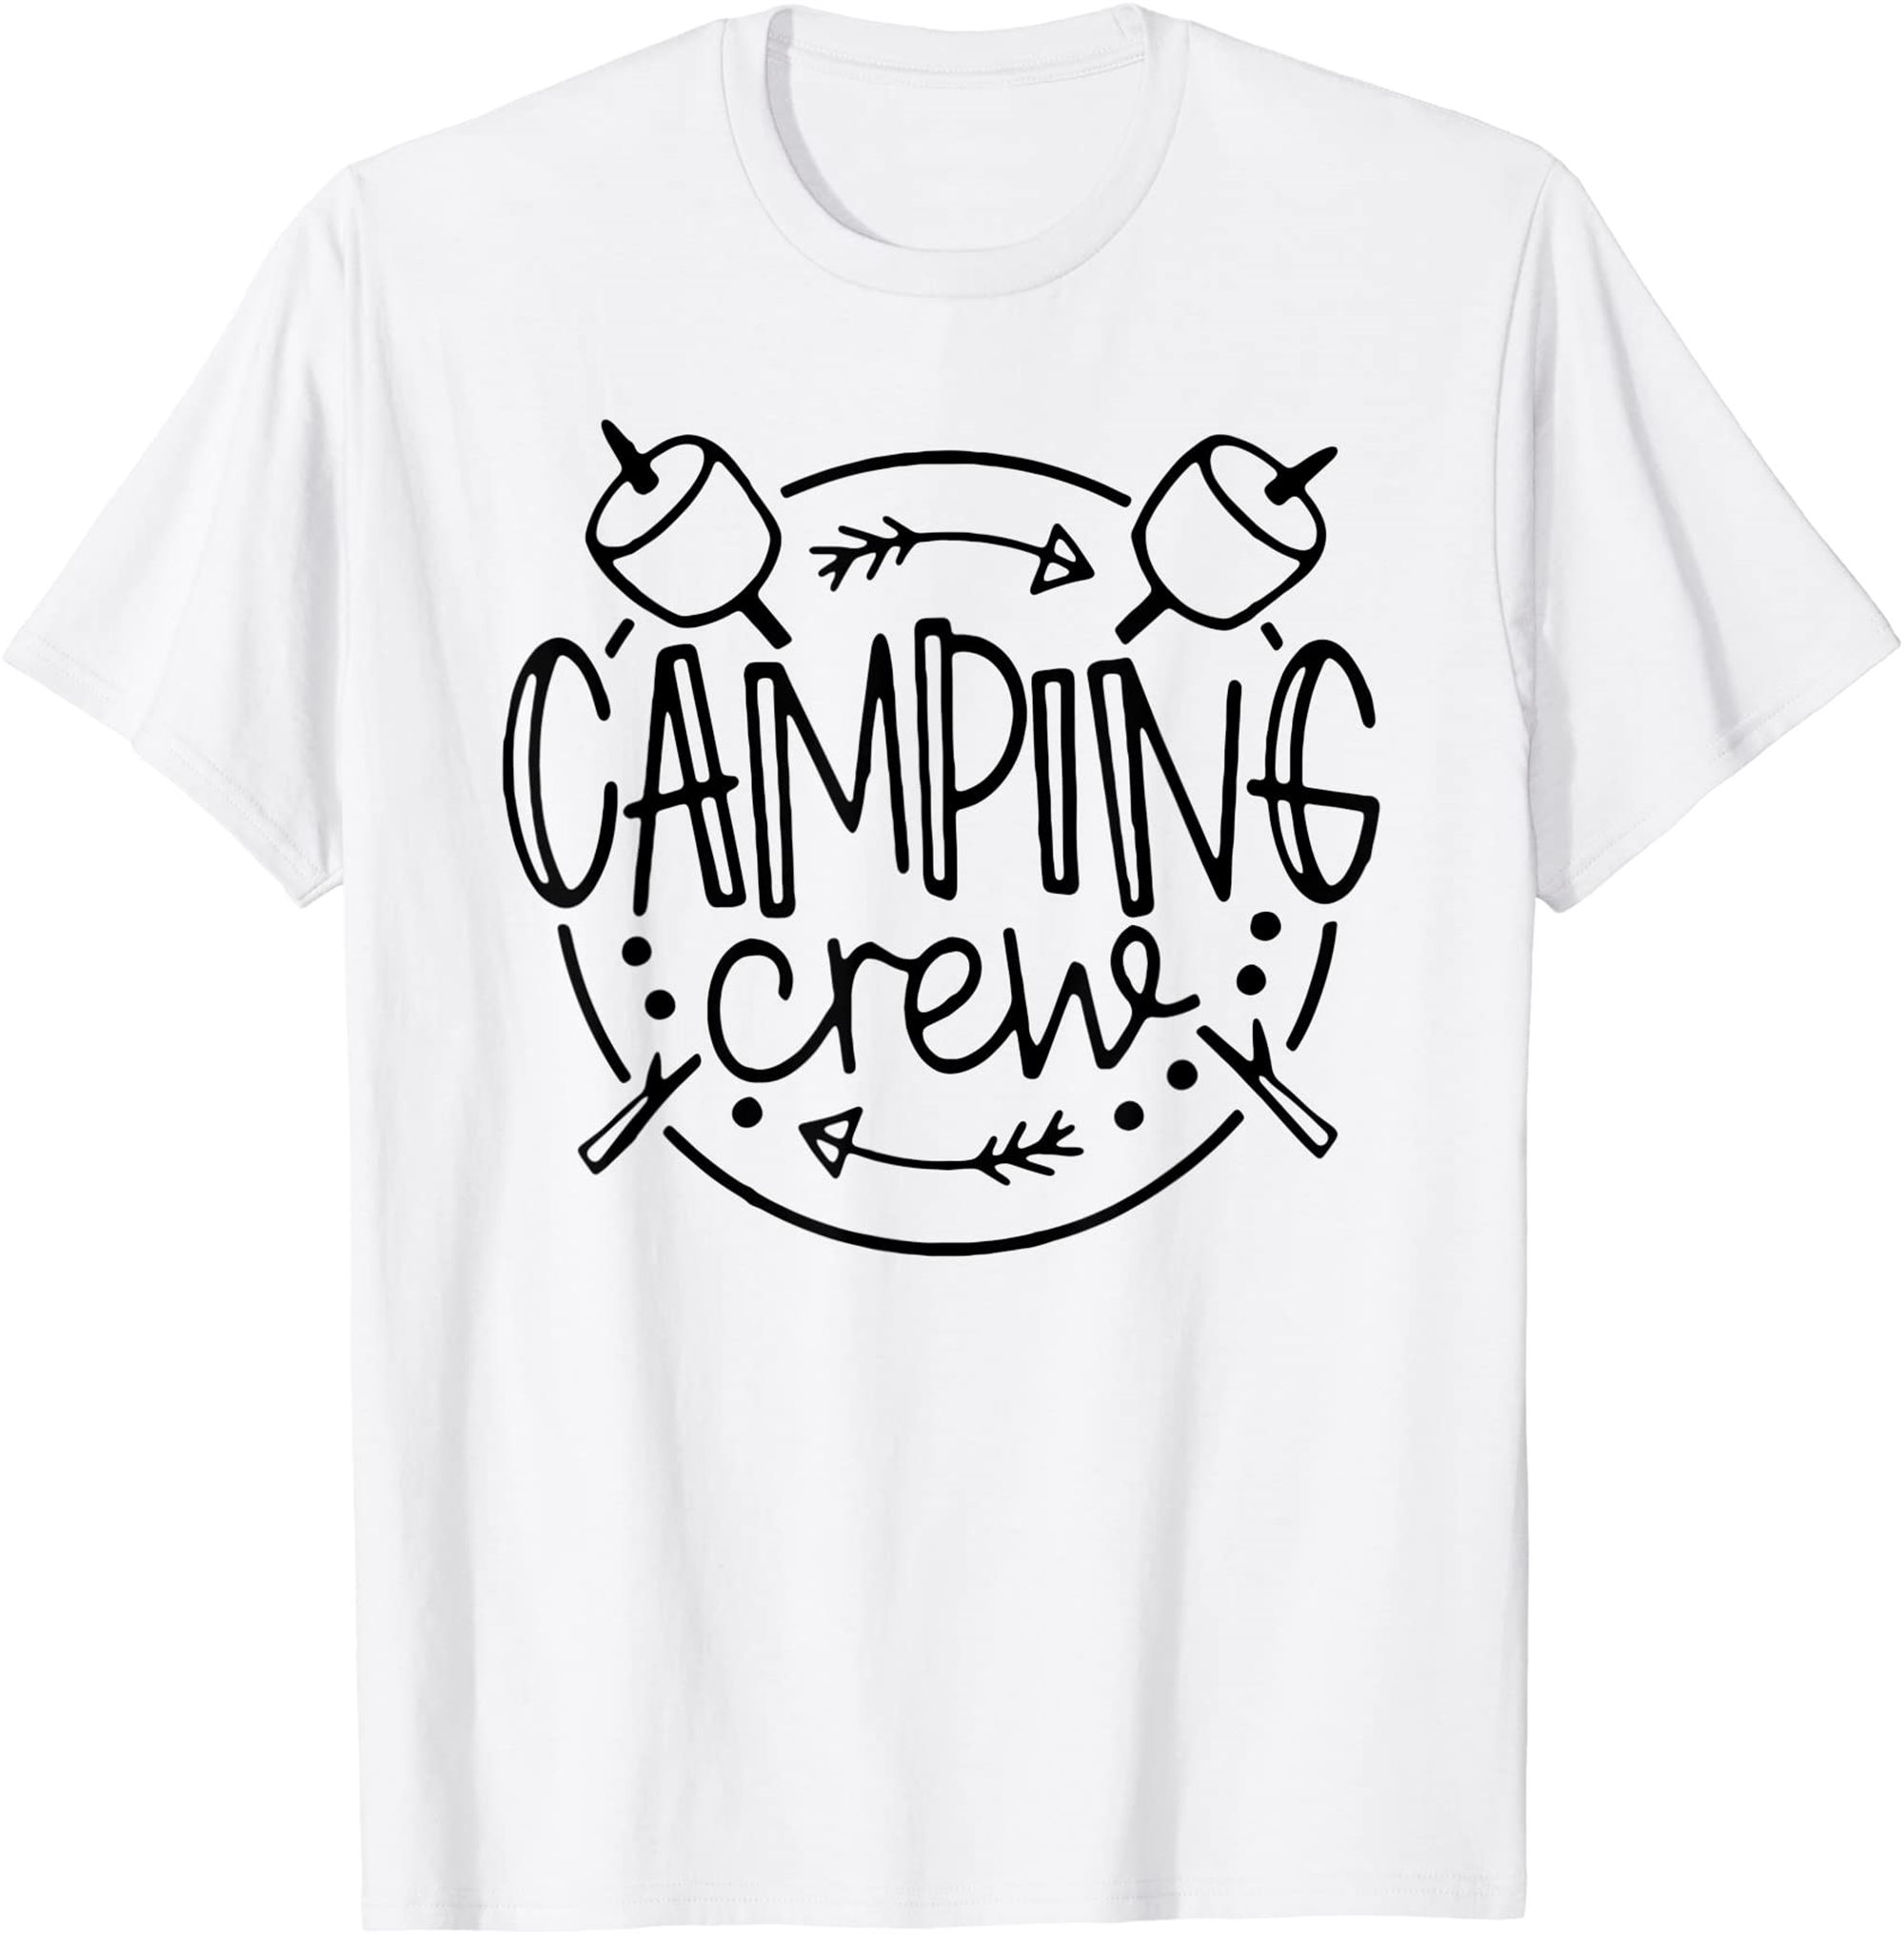 Camping Crew Funny Rv Camper Outdoors Vacation Adventures T-shirt Size Up To 5xl